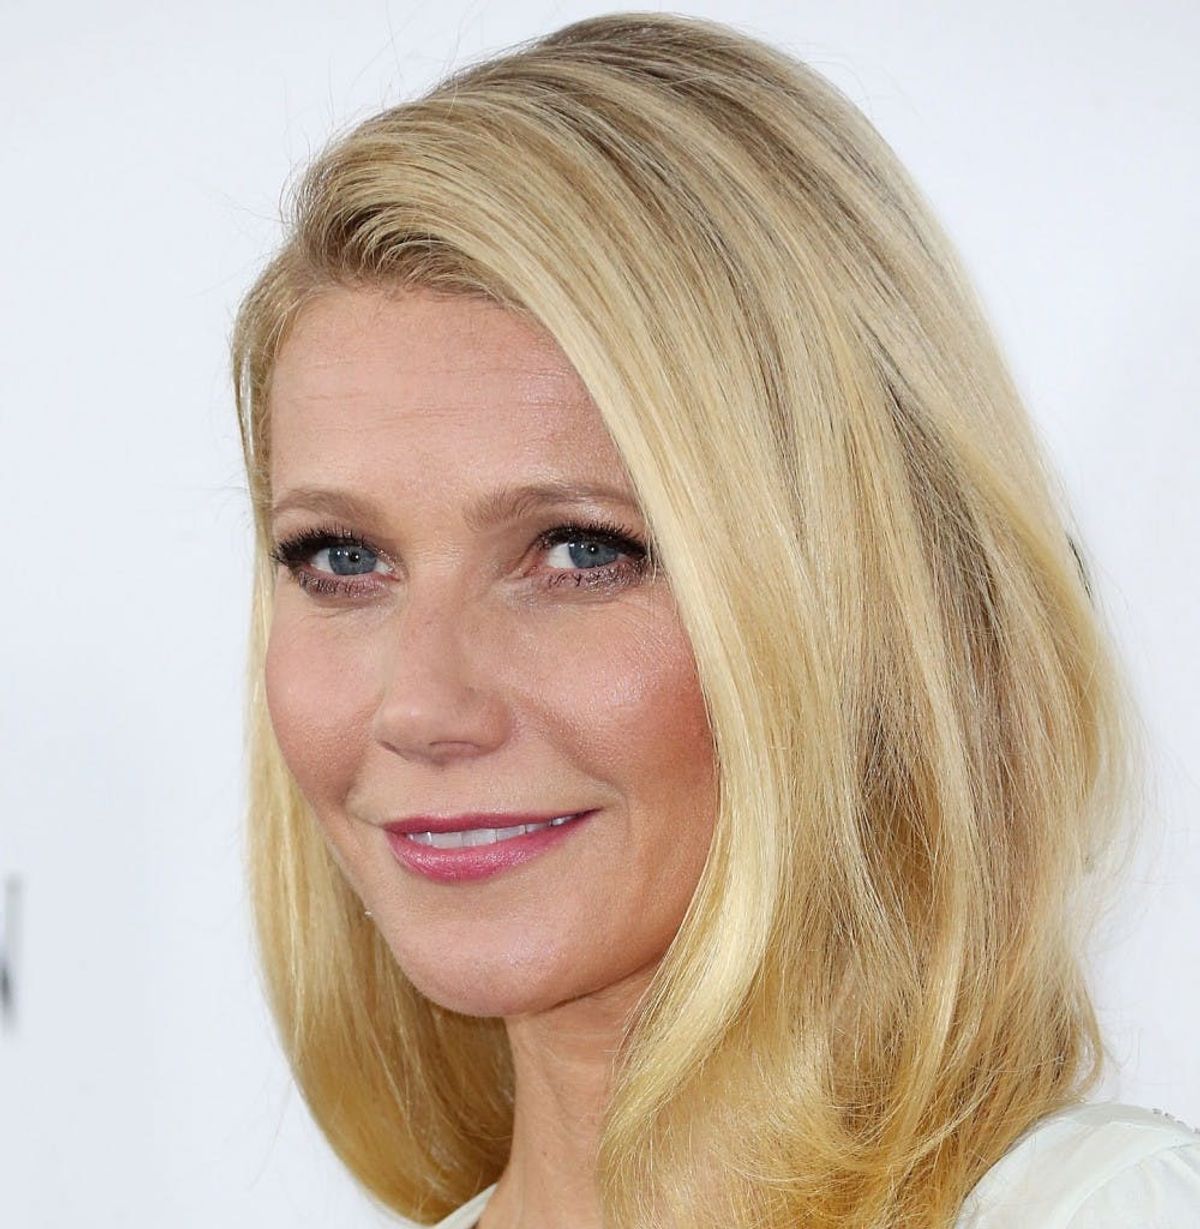 Things Are Getting Juicy as Gwyneth Paltrow Launches Her Natural Beauty Line Today